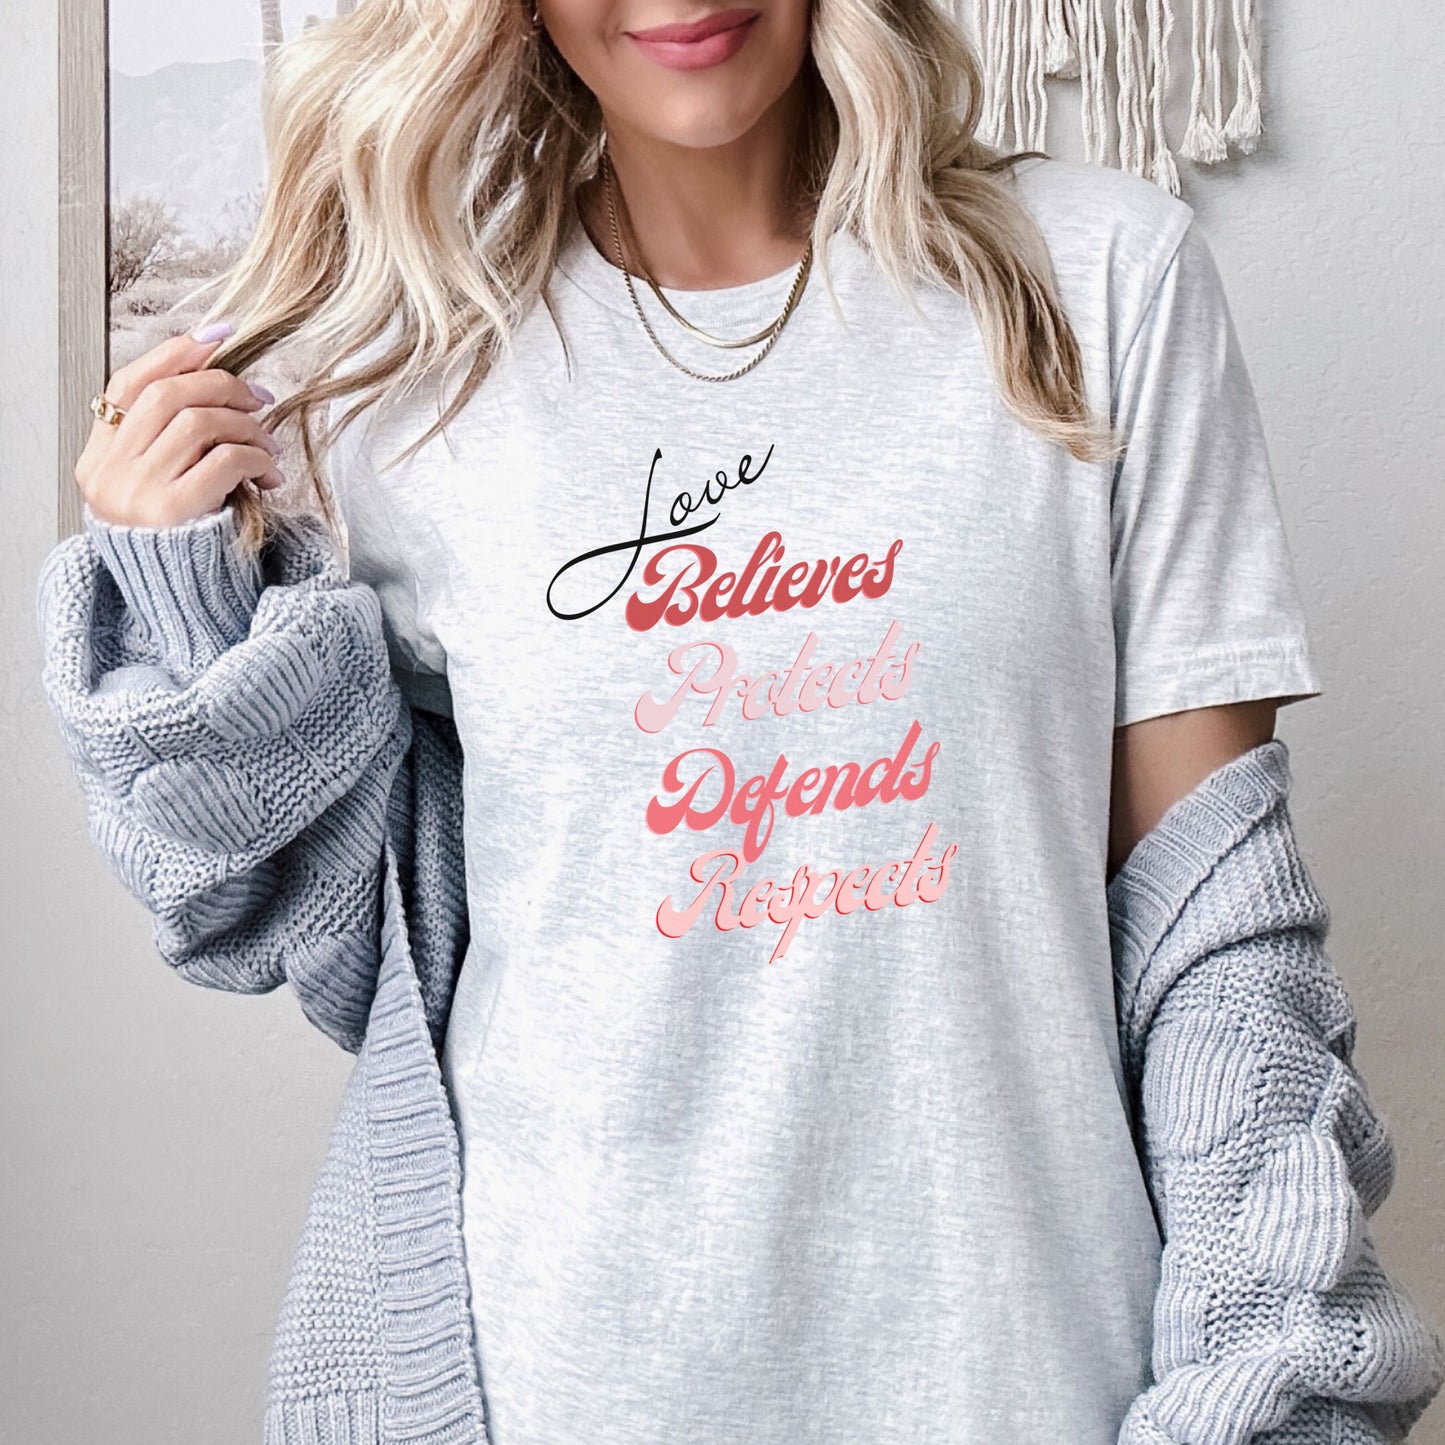 The front of this tshirt has the impactful phrase, "Love Believes Protects Defends Respects," artfully displayed in a beautiful retro font, capturing attention while spreading a message of compassion, strength, and support. Crafted with care and commitment, this tee combines a powerful message with a touch of retro elegance.